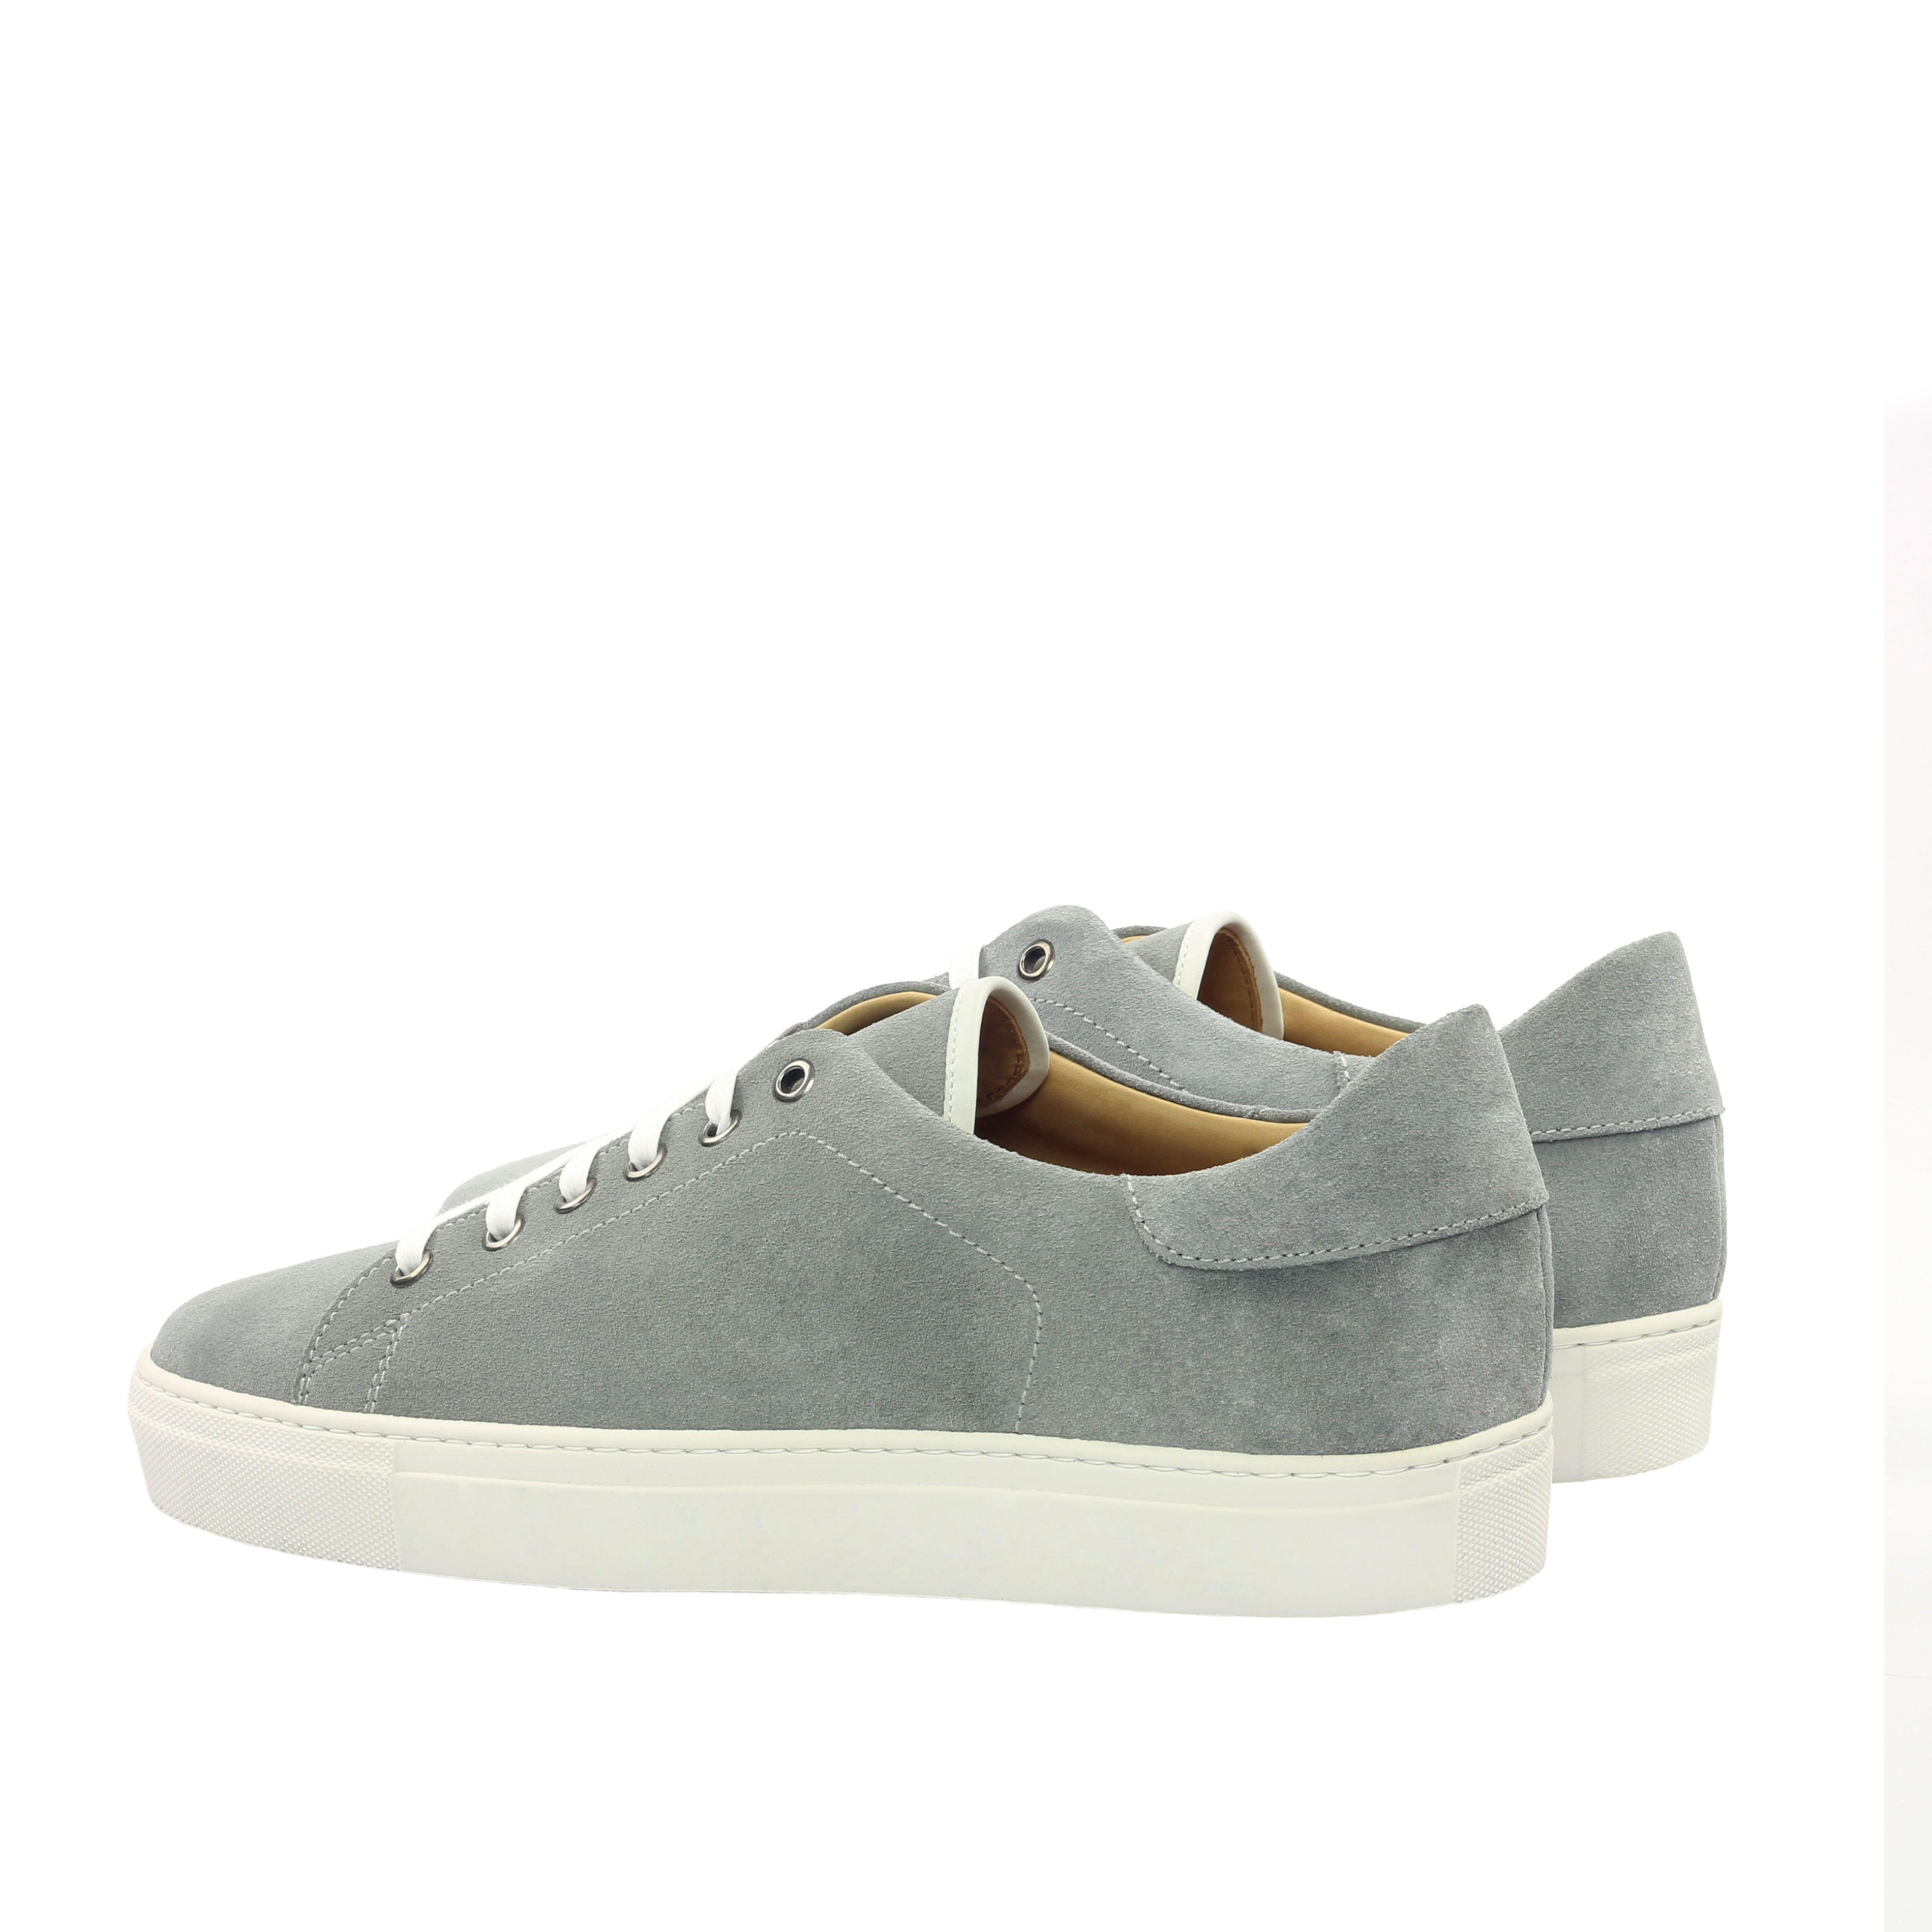 MANOR OF LONDON 'The Perry' Grey Suede & White Calf Tennis Trainer Luxury Custom Initials Monogrammed Back Side View